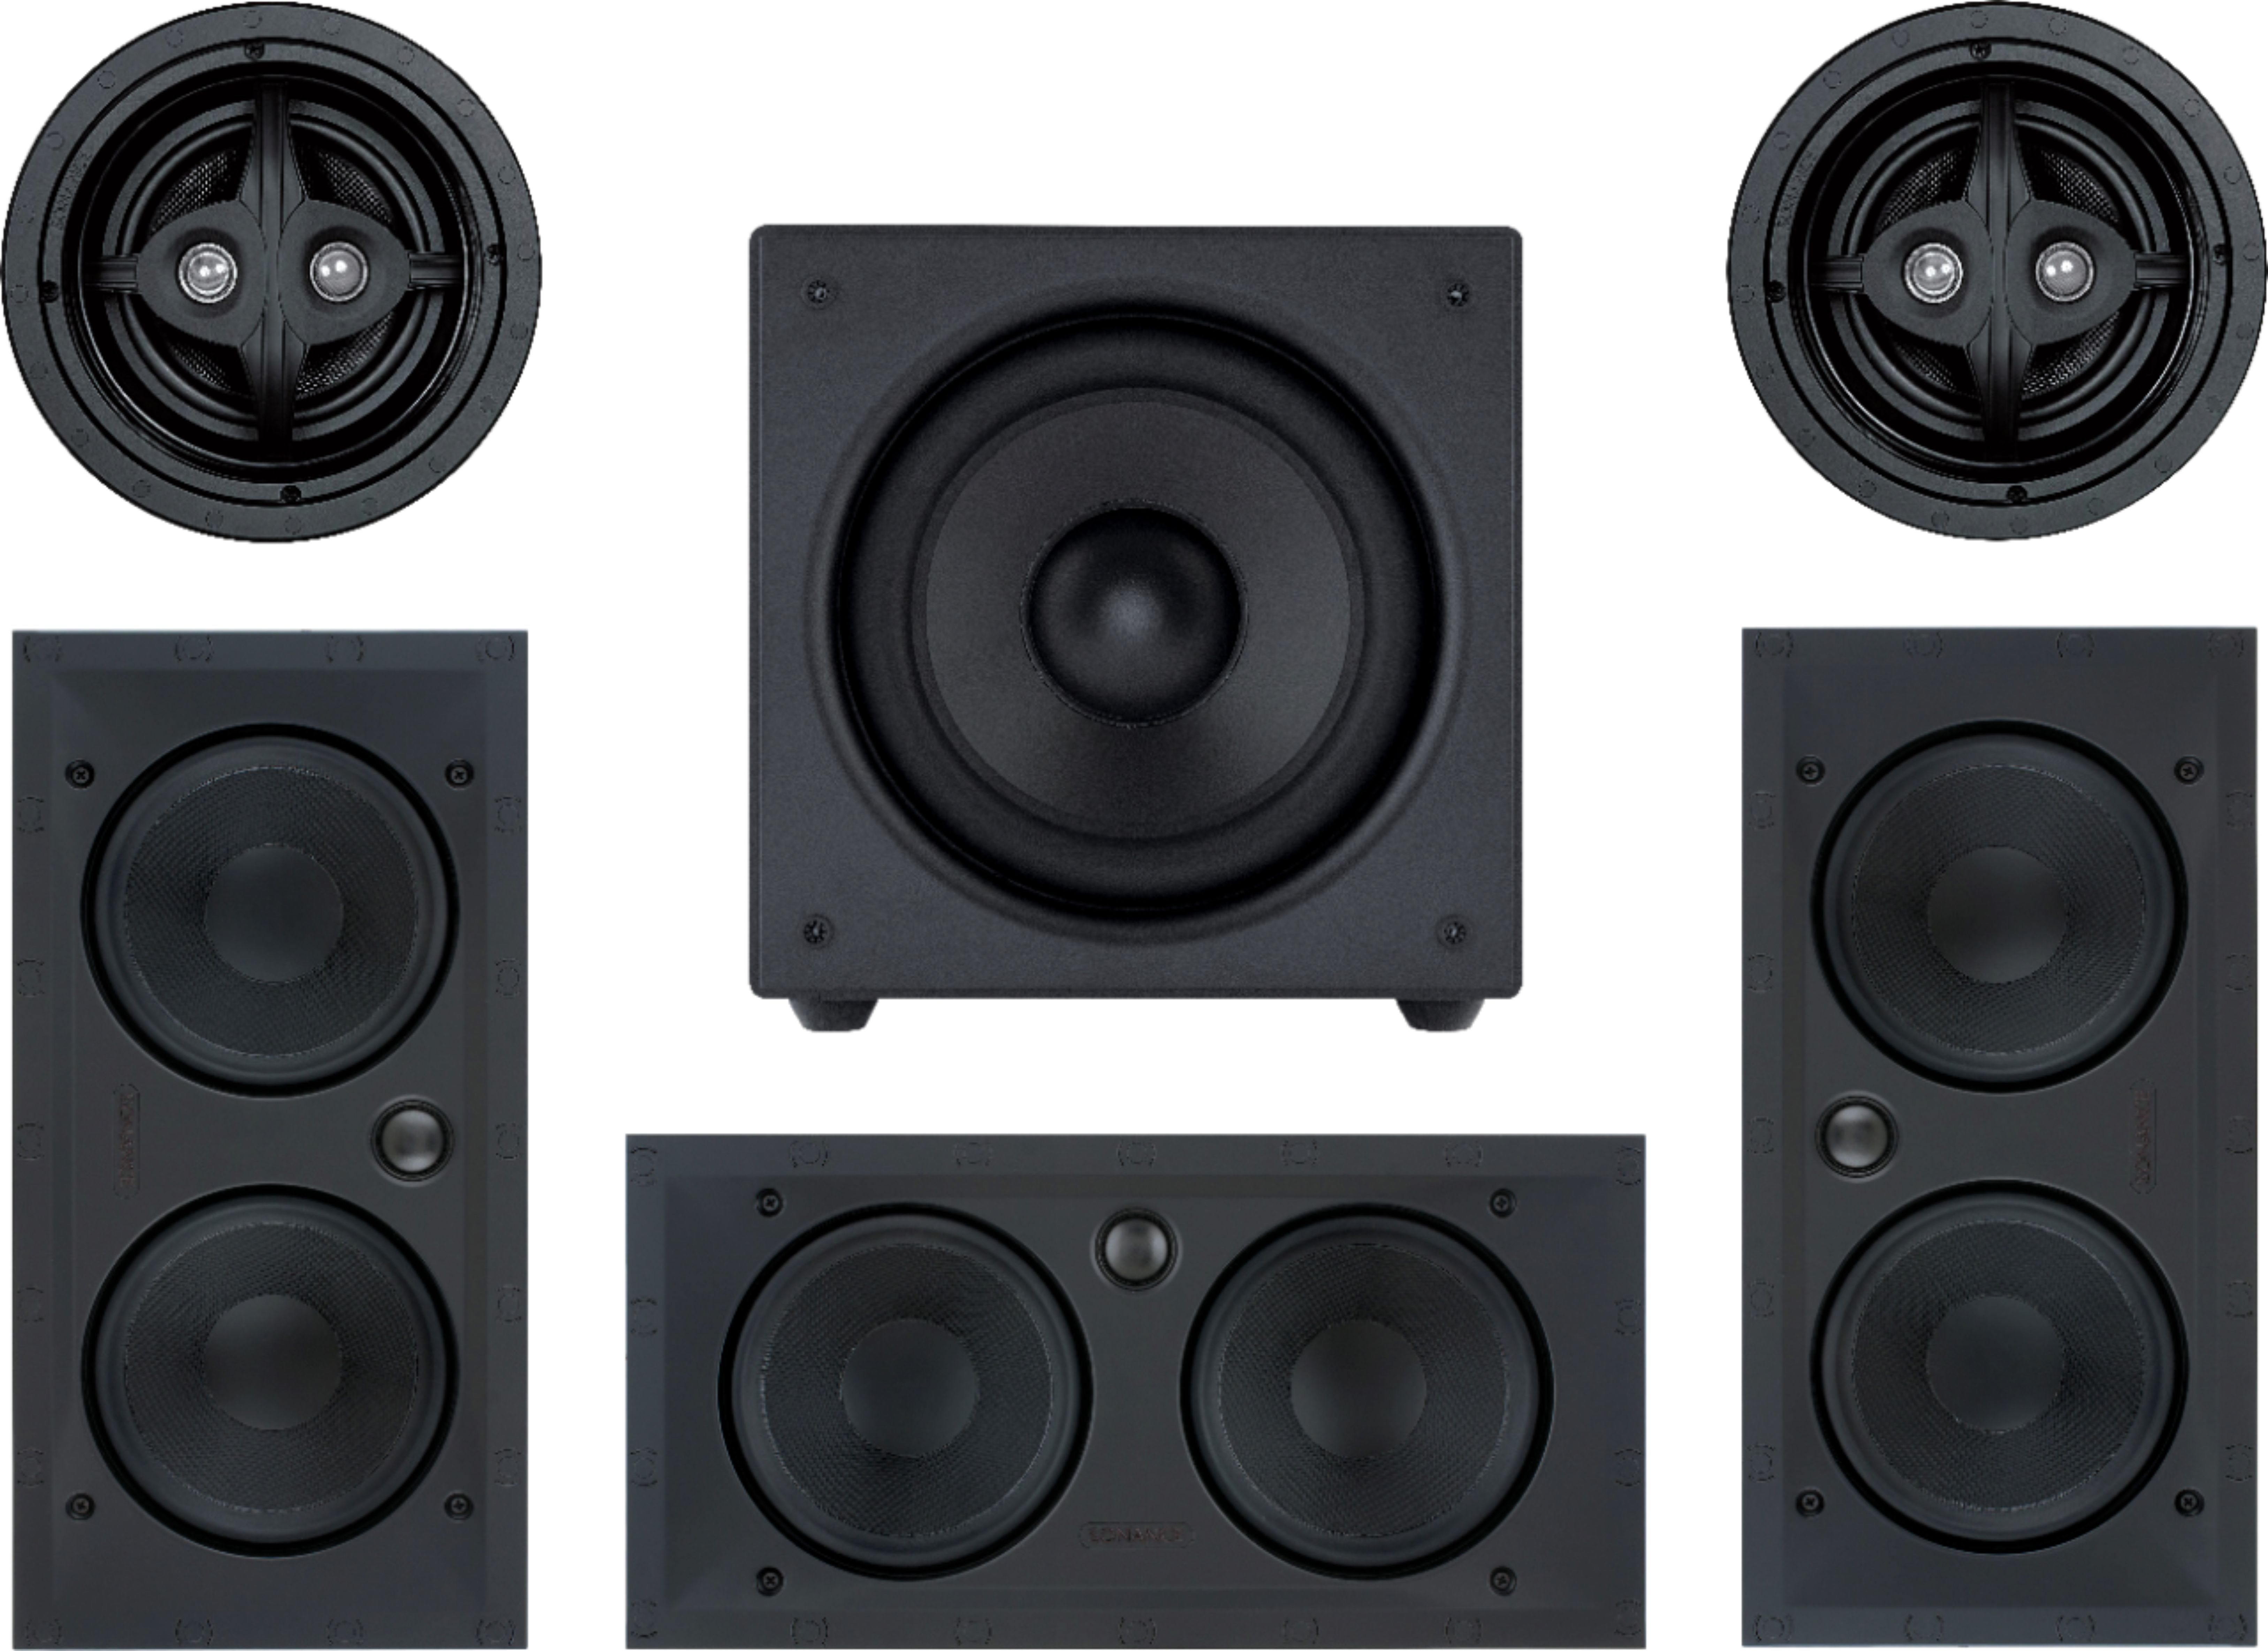 Sonance – Premium 6-1/2″ In-Wall Speaker System with Wireless Subwoofer – Paintable White